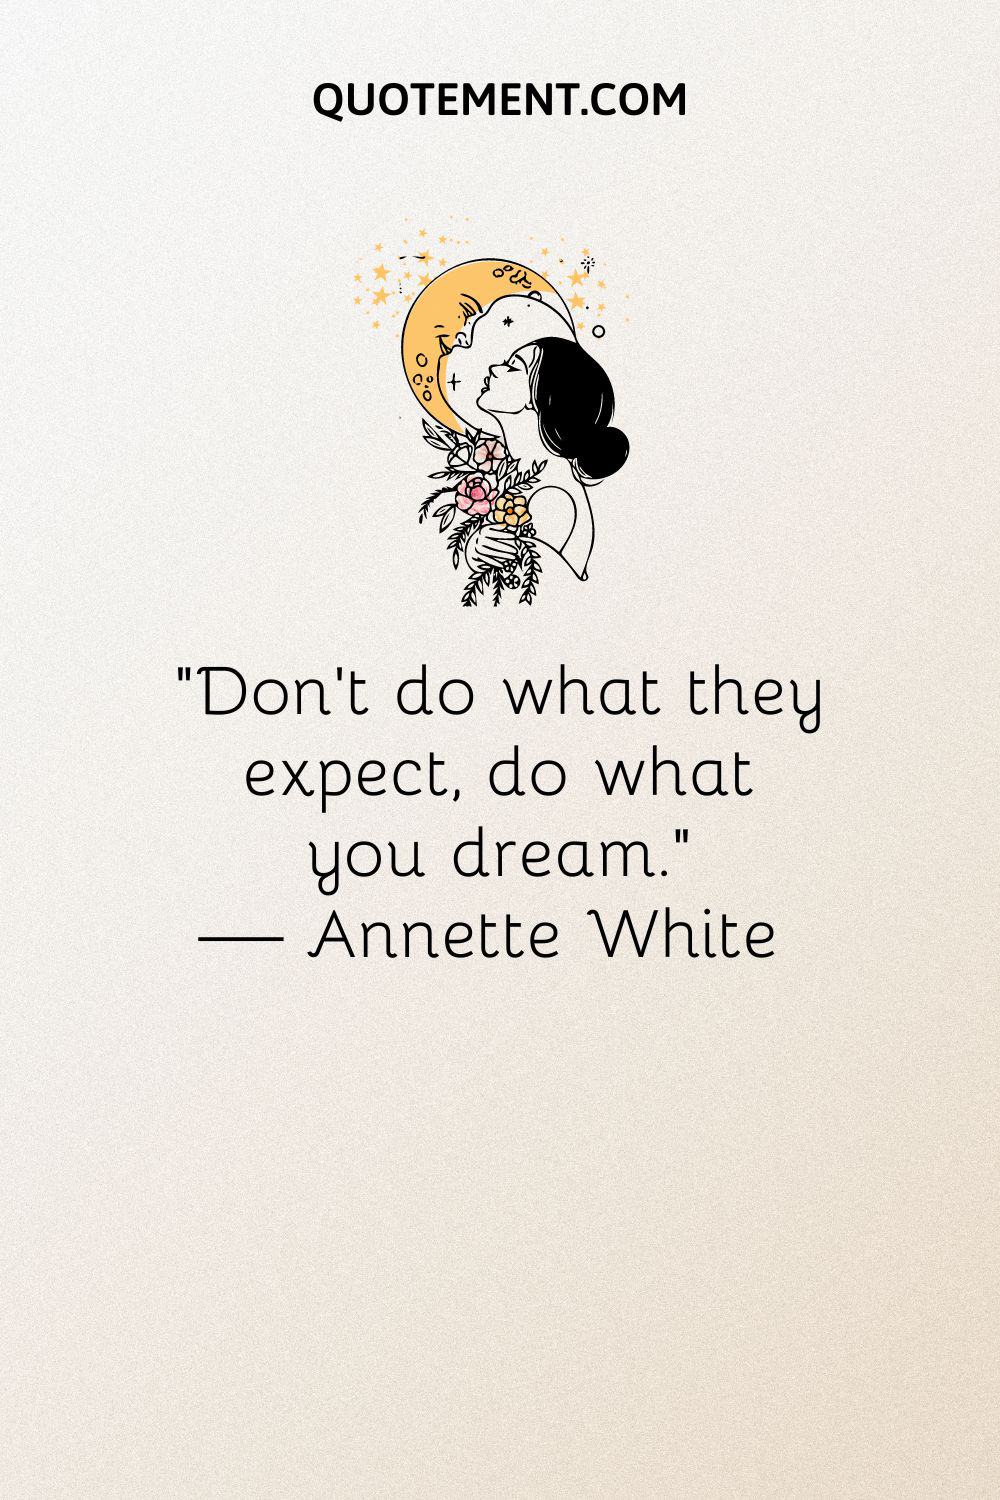 “Don’t do what they expect, do what you dream.” — Annette White